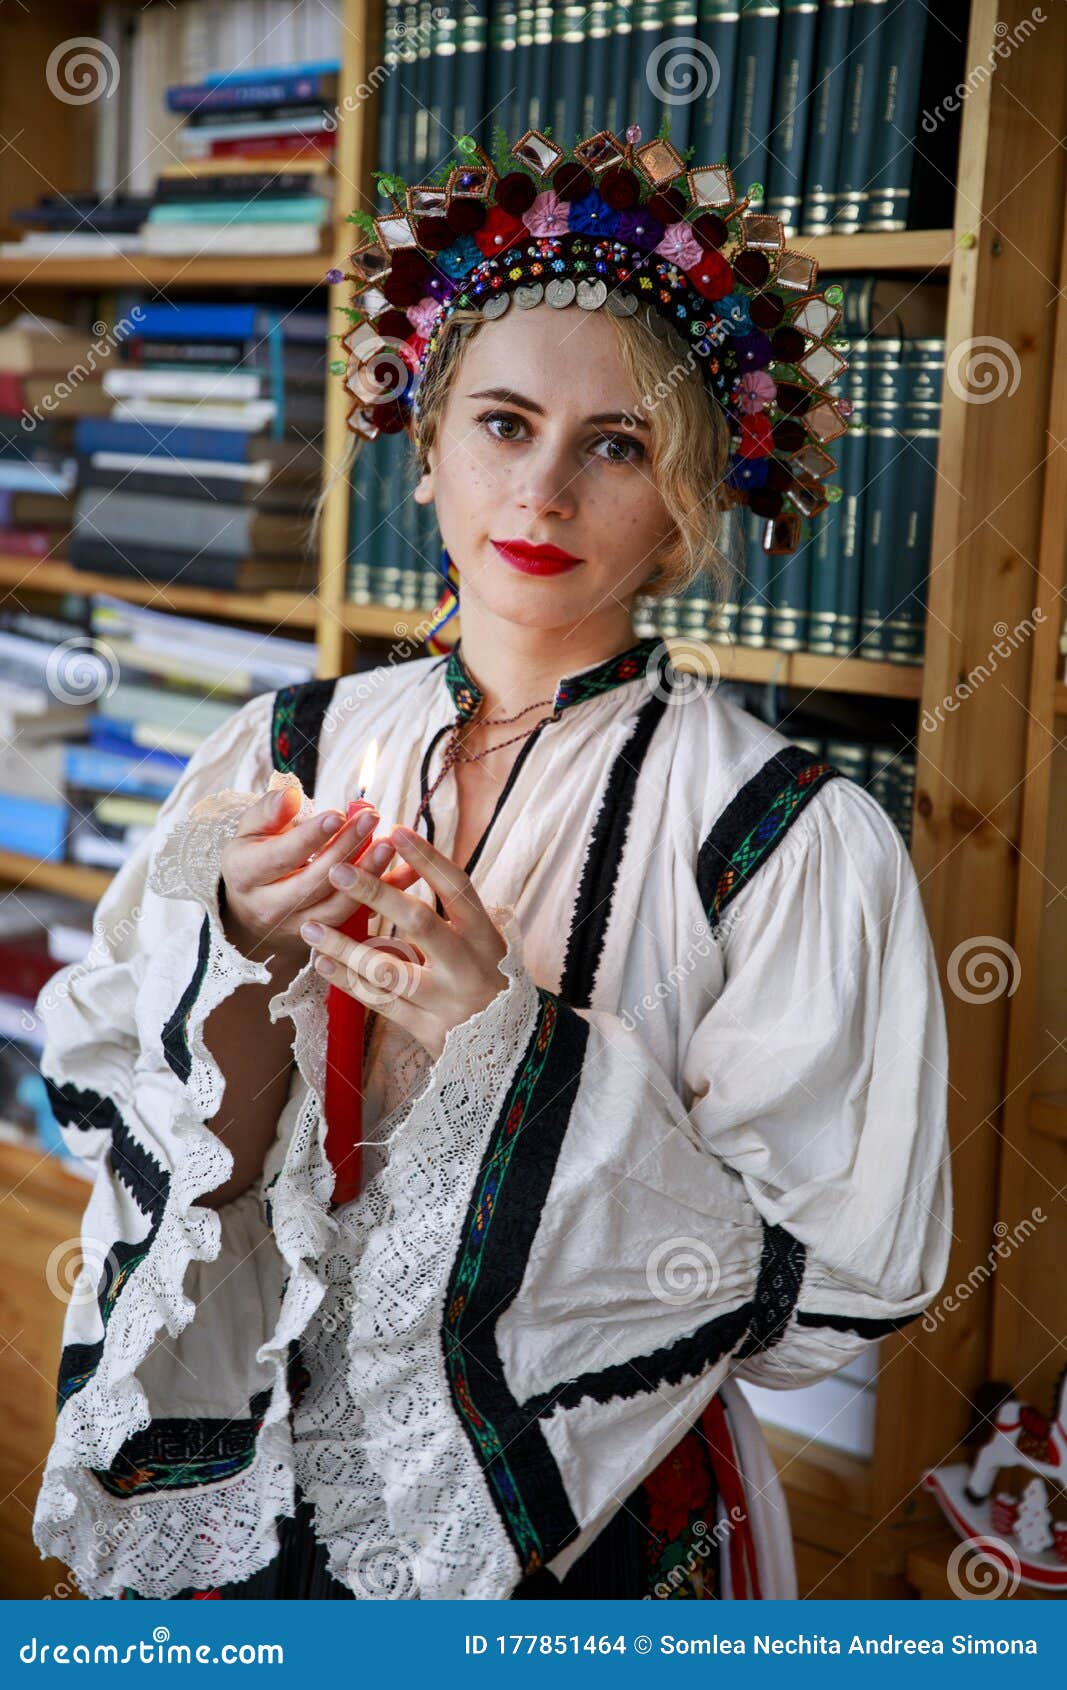 beautiful woman dressed in traditional romanian costume